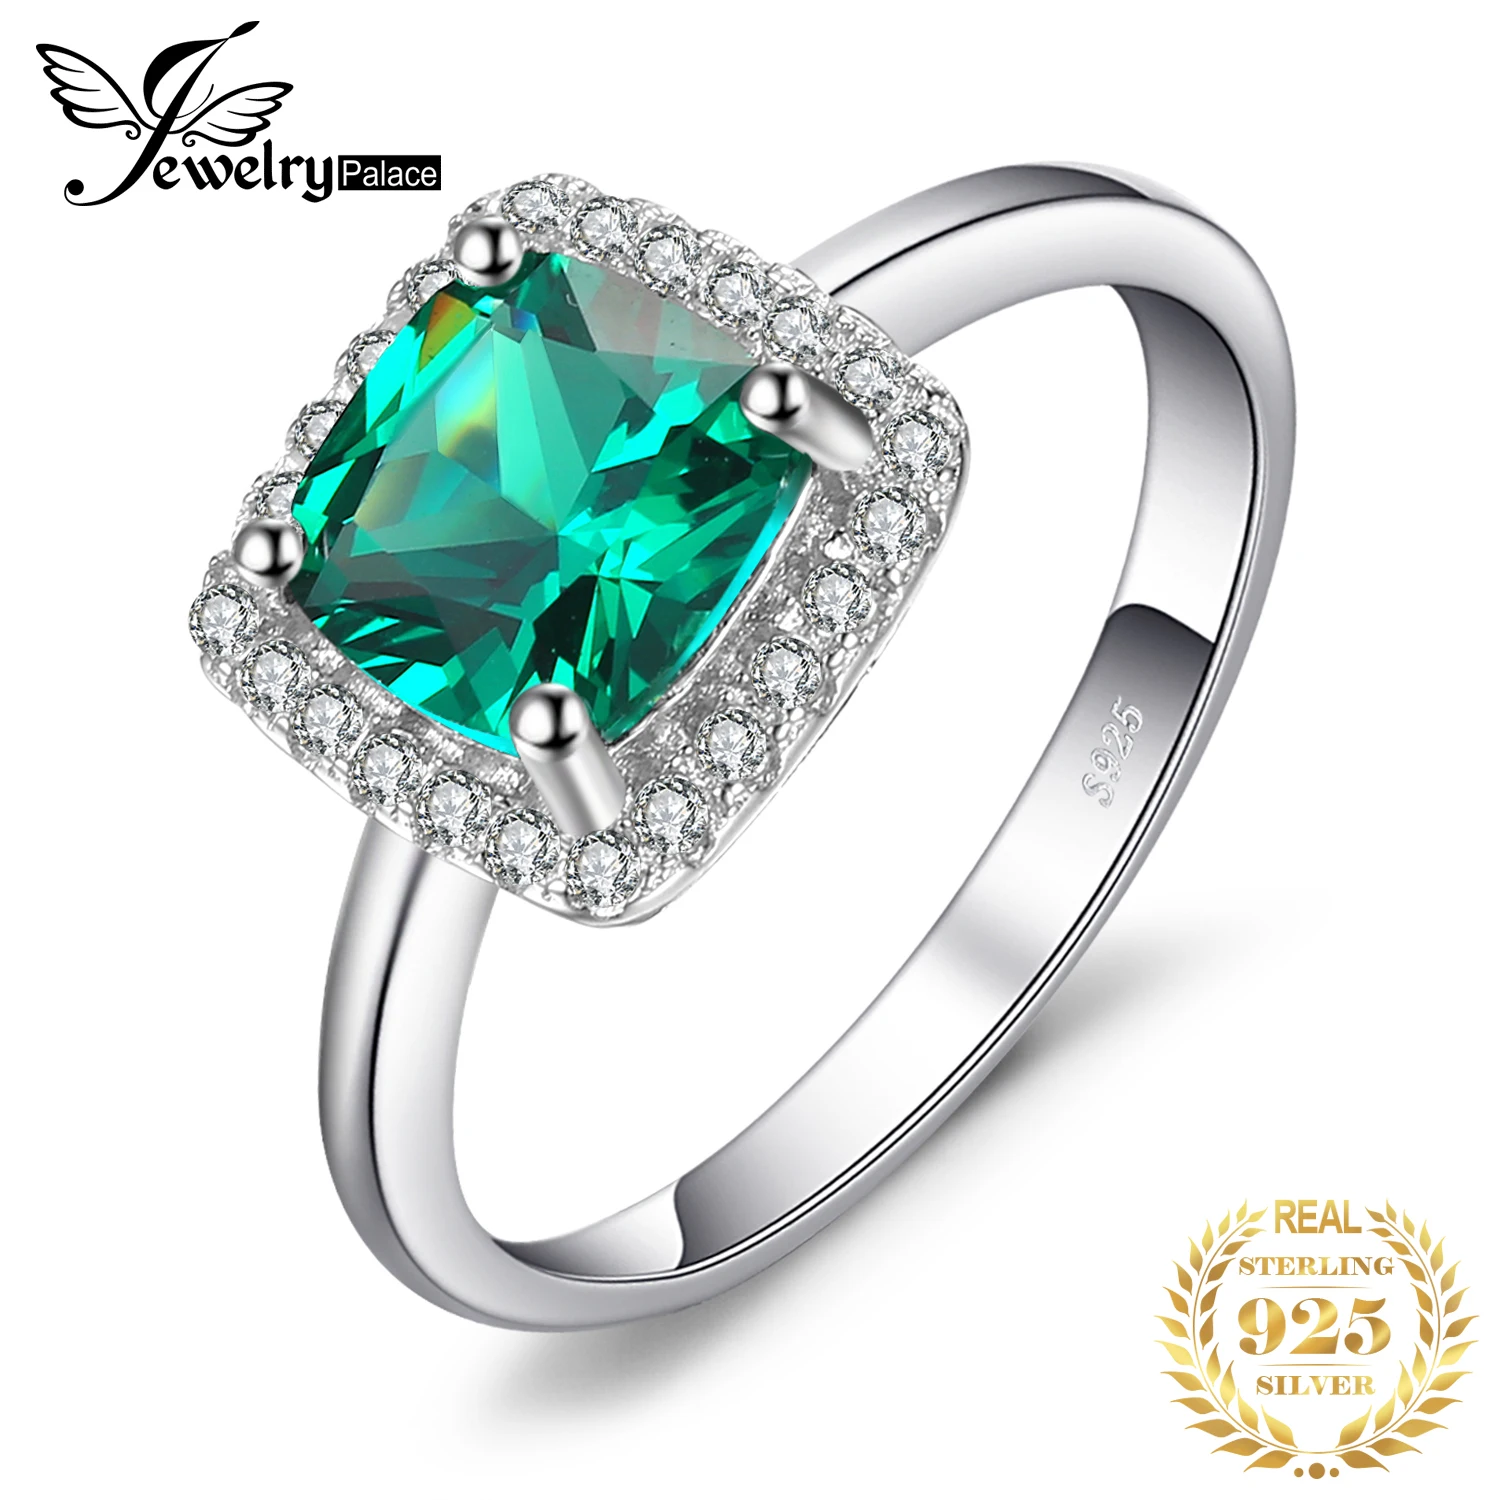 JewelryPalace Emerald Cubic Zirconia Engagement Ring 925 Sterling Silver 